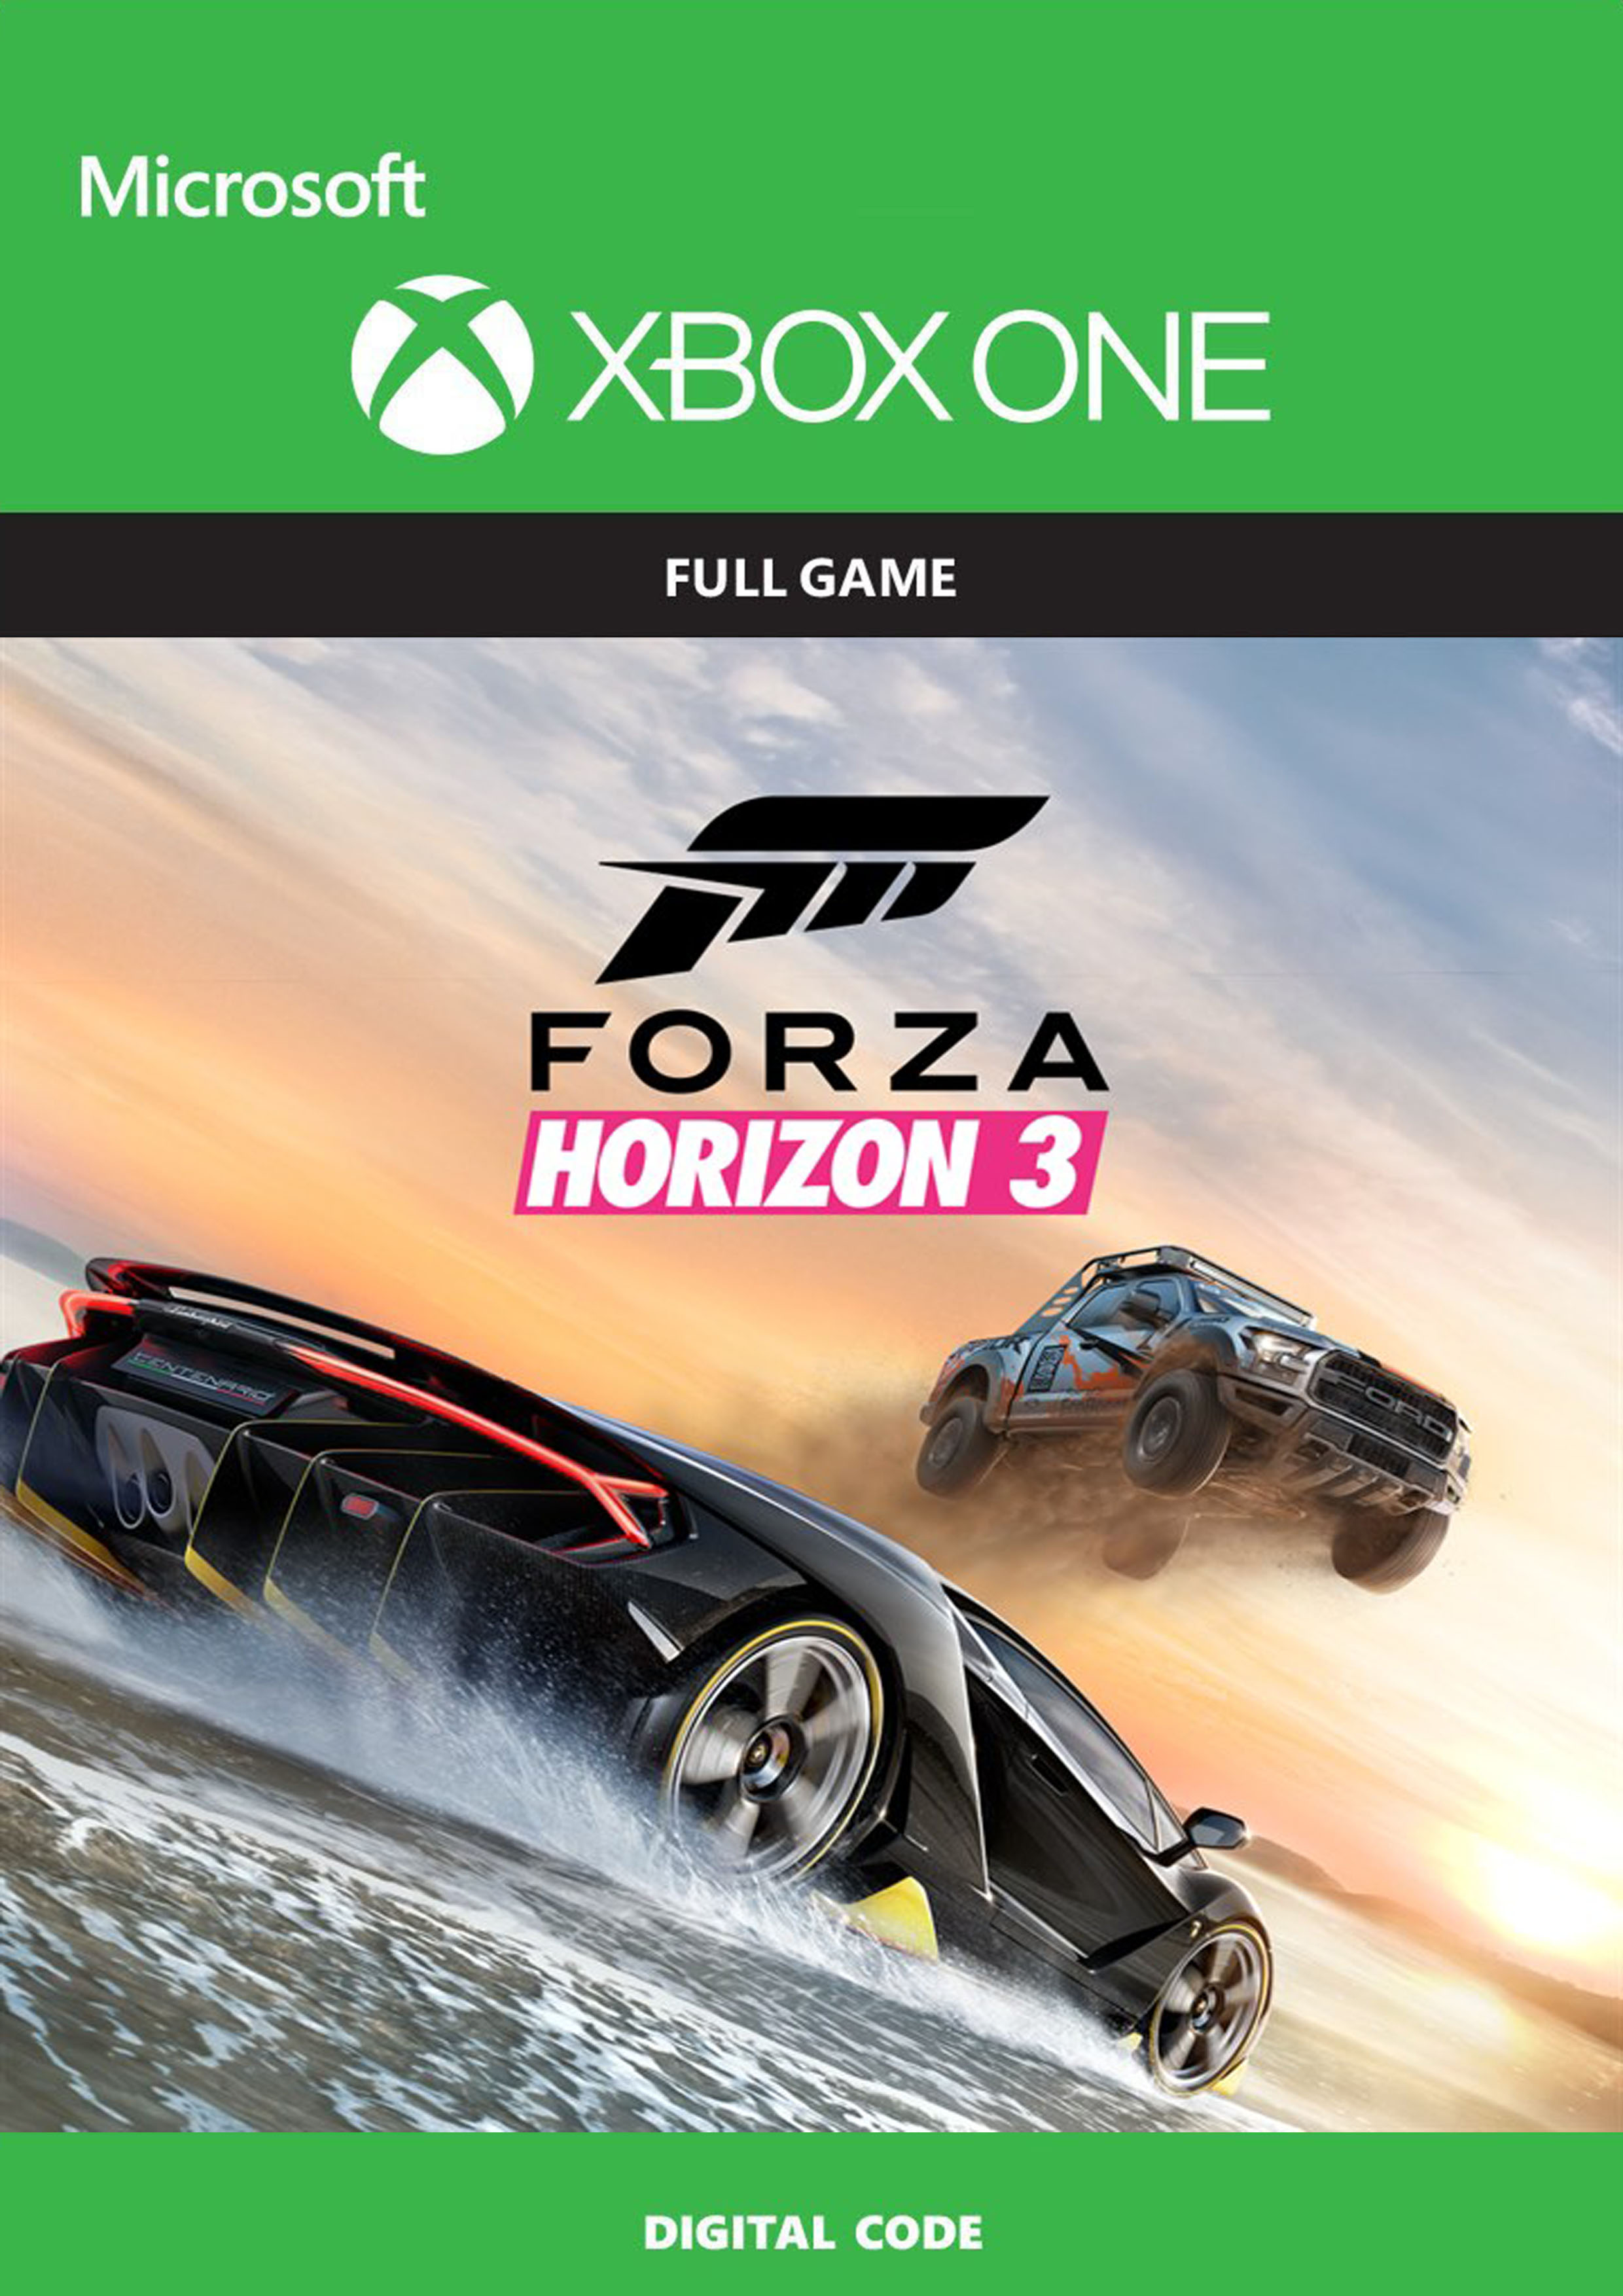 Buy Key Forza Horizon 3 Standard Edition Xbox cheap, choose from different  sellers with different payment methods. Instant delivery.